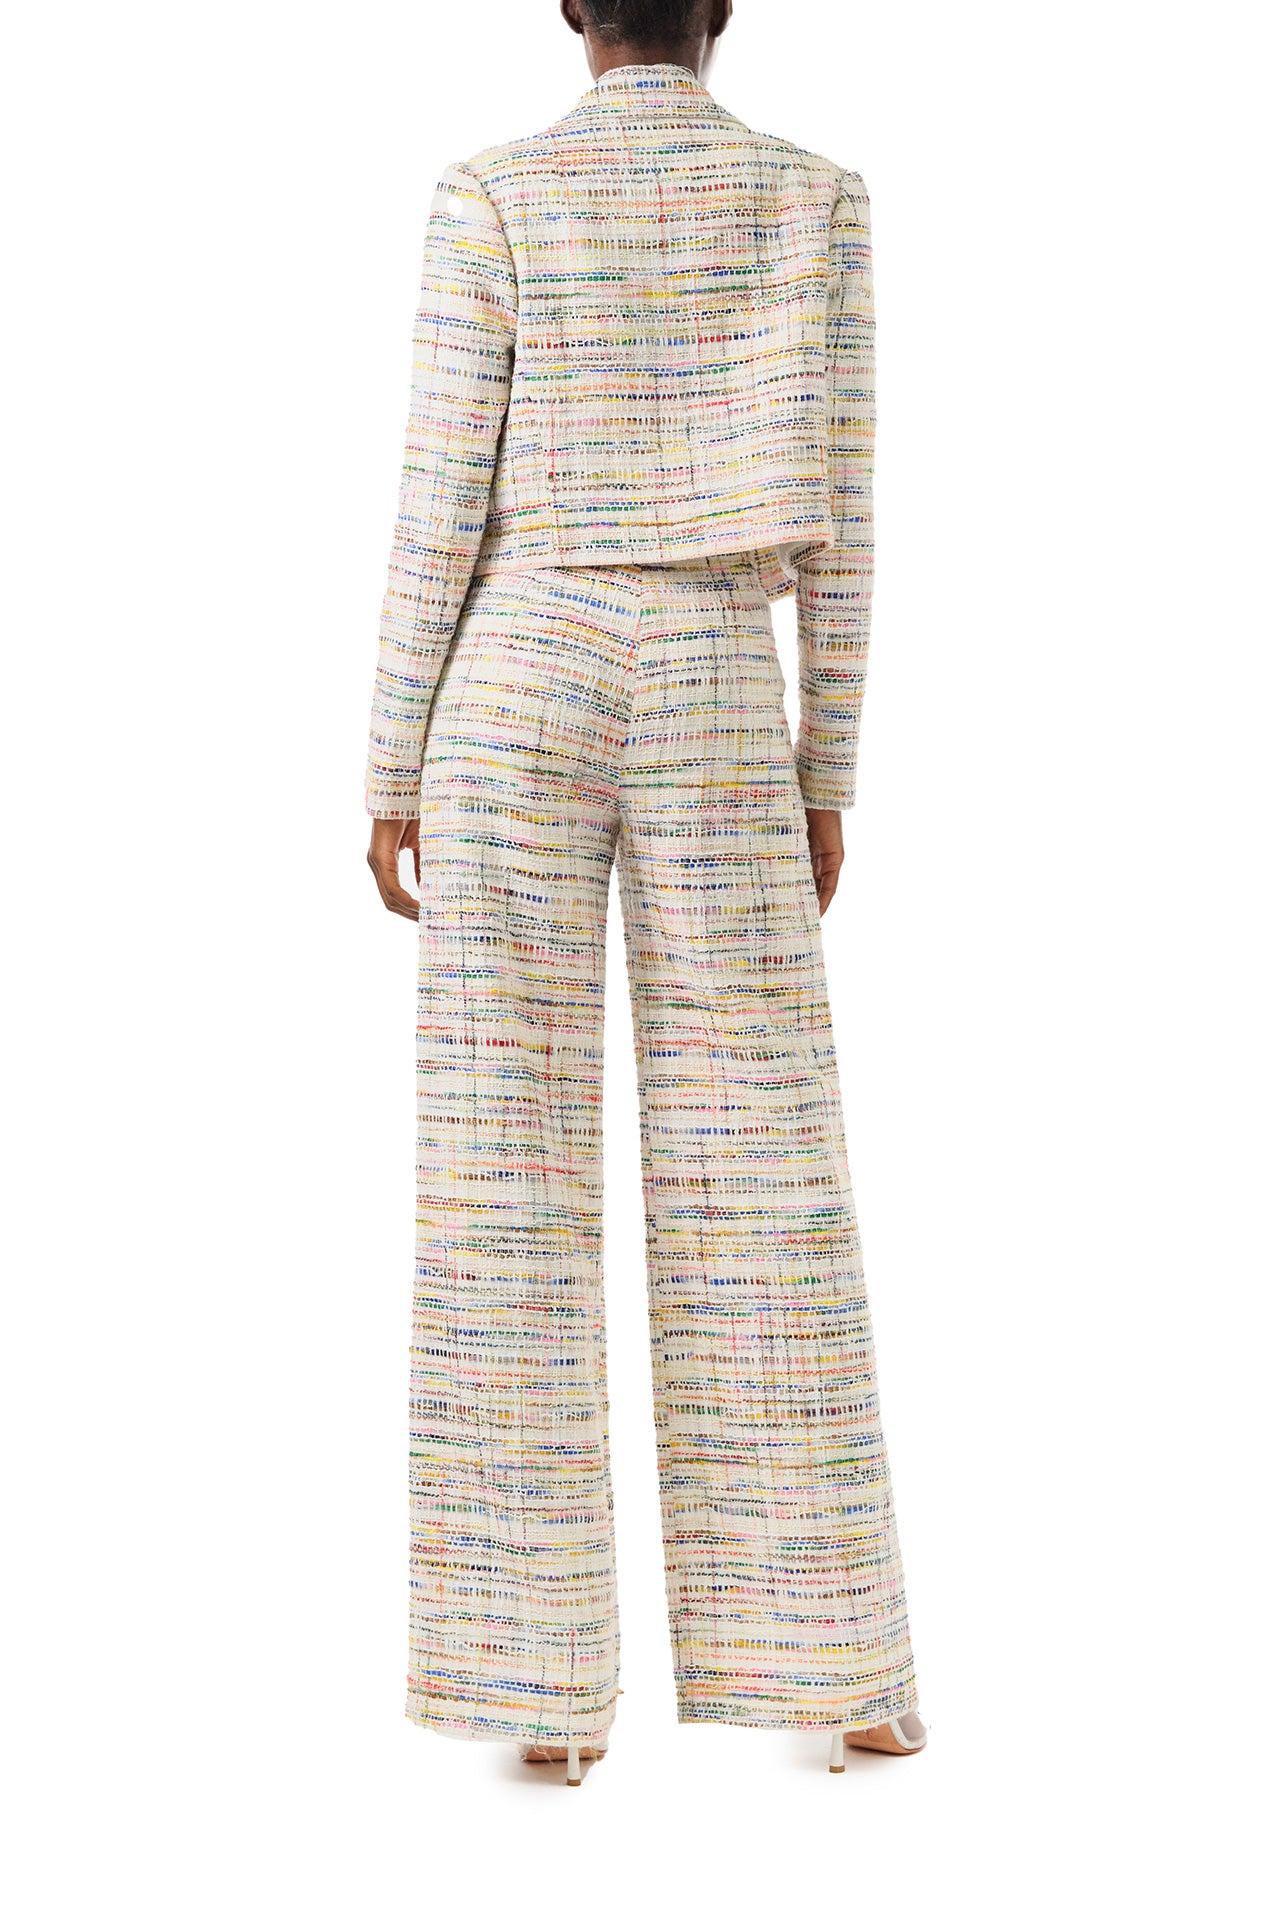 Monique Lhuillier Spring 2024 high waisted trouser with pockets in multi color tweed - back.